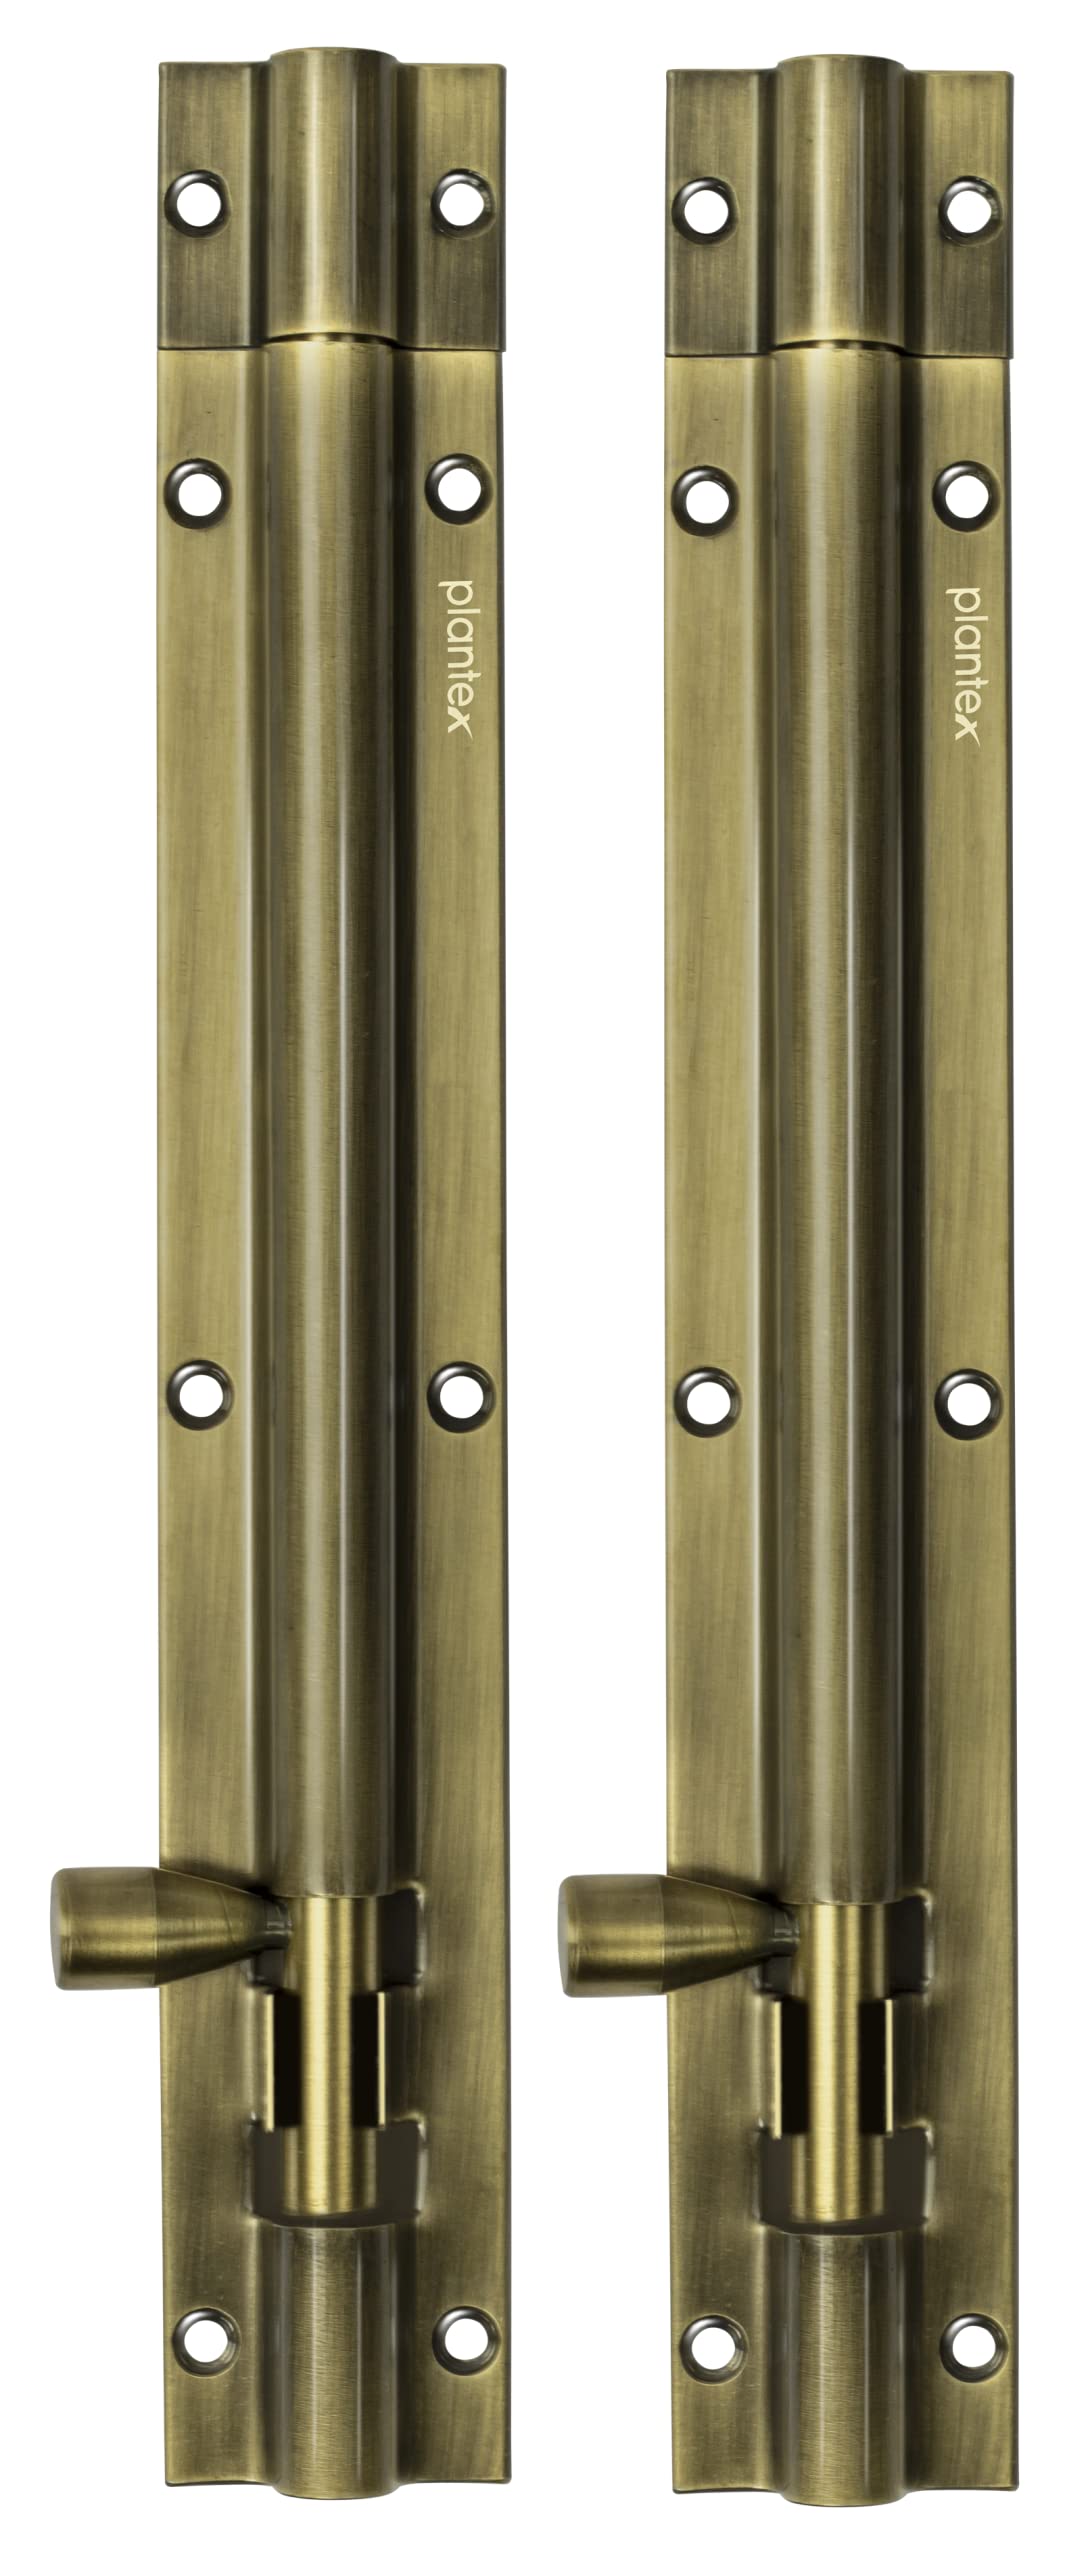 Plantex 8- inches Tower Bolt for Windows/Doors/Wardrobe - Pack of 2 (Antique)